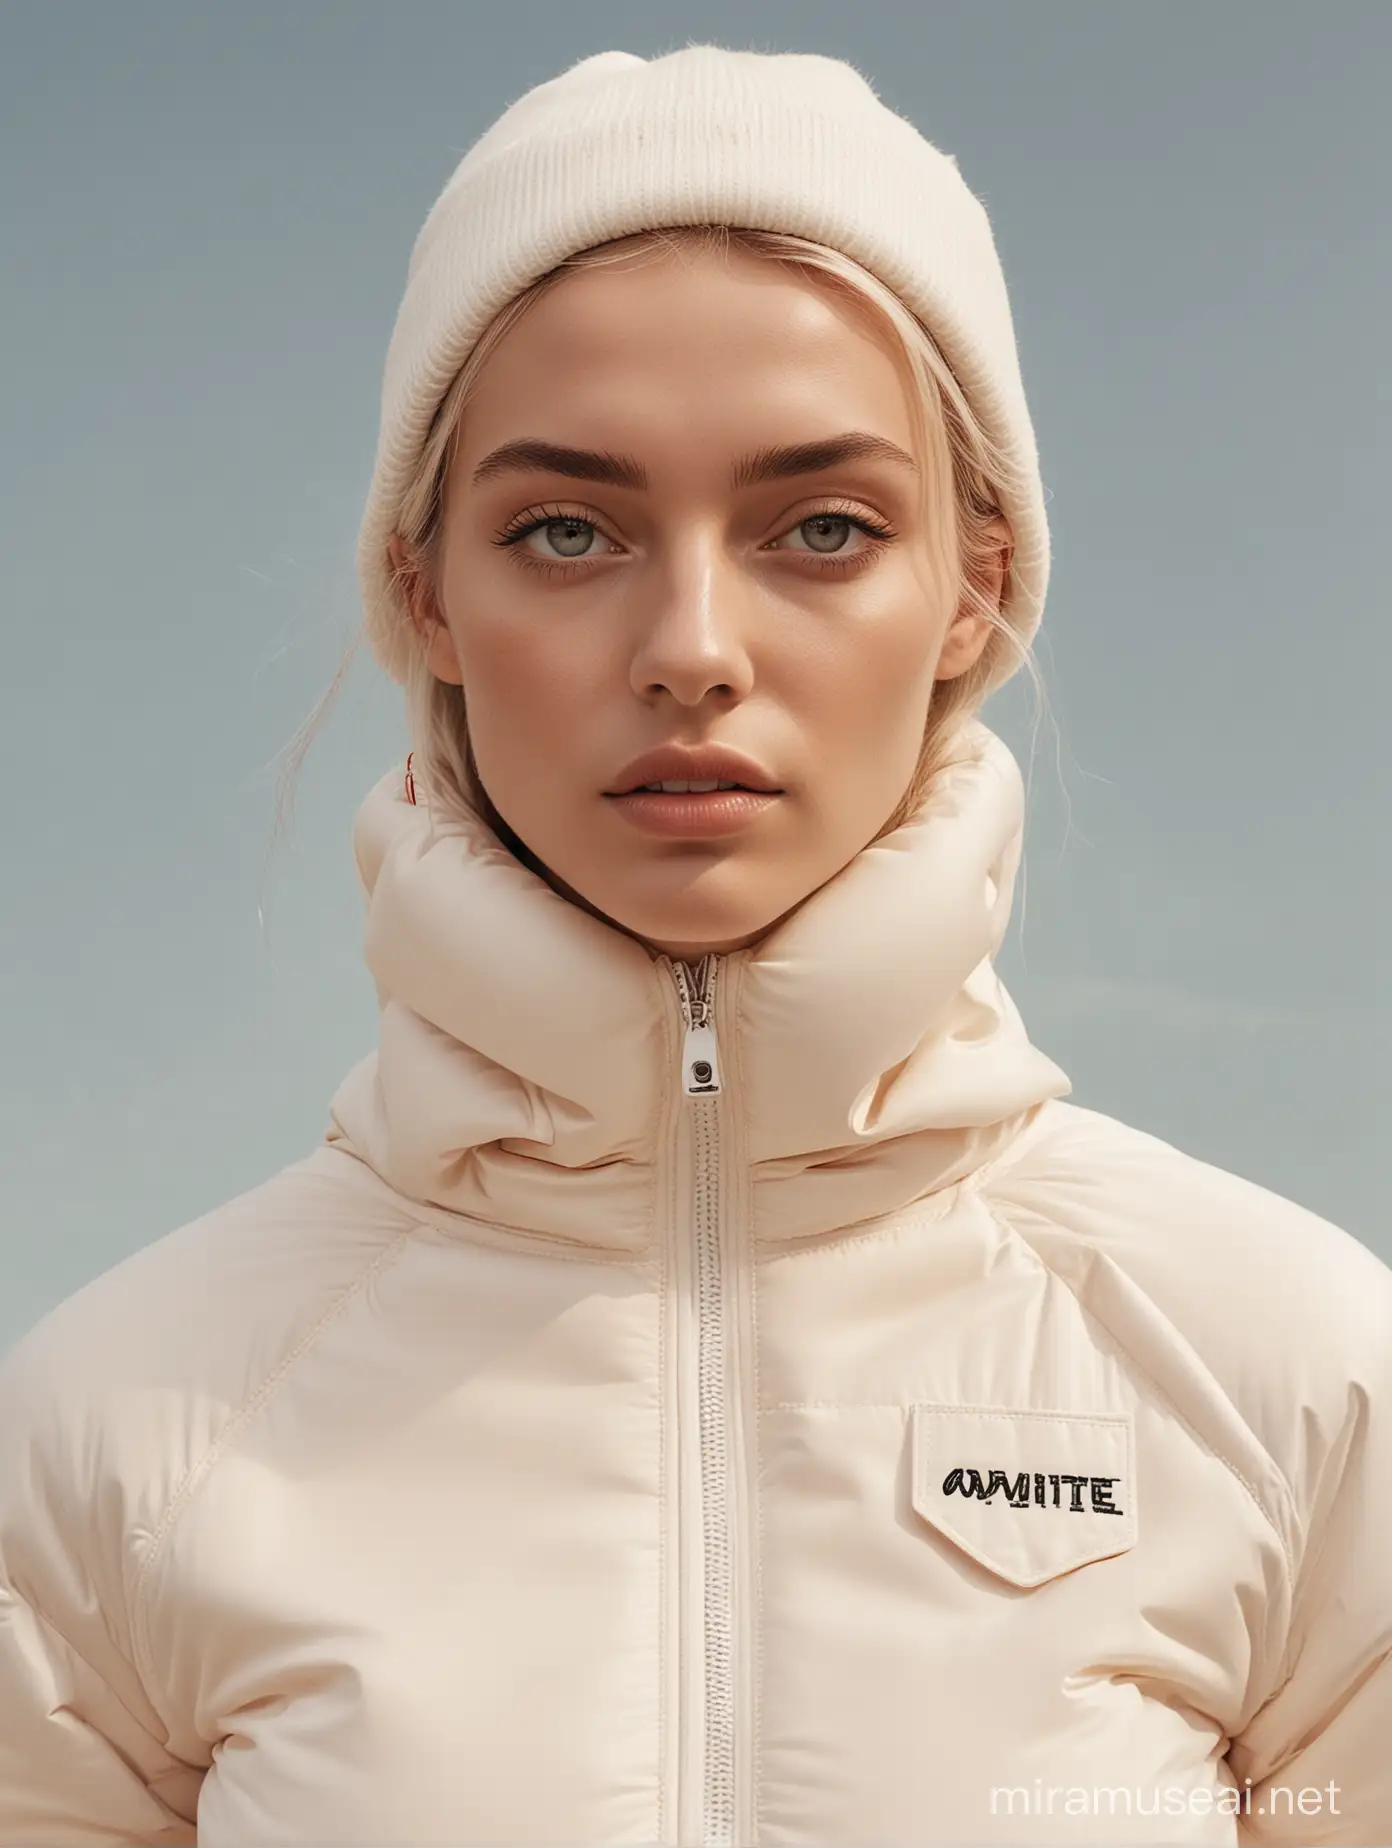 Futuristic Outdoor Sports Photo with OffWhite x Jacquemus Collaboration